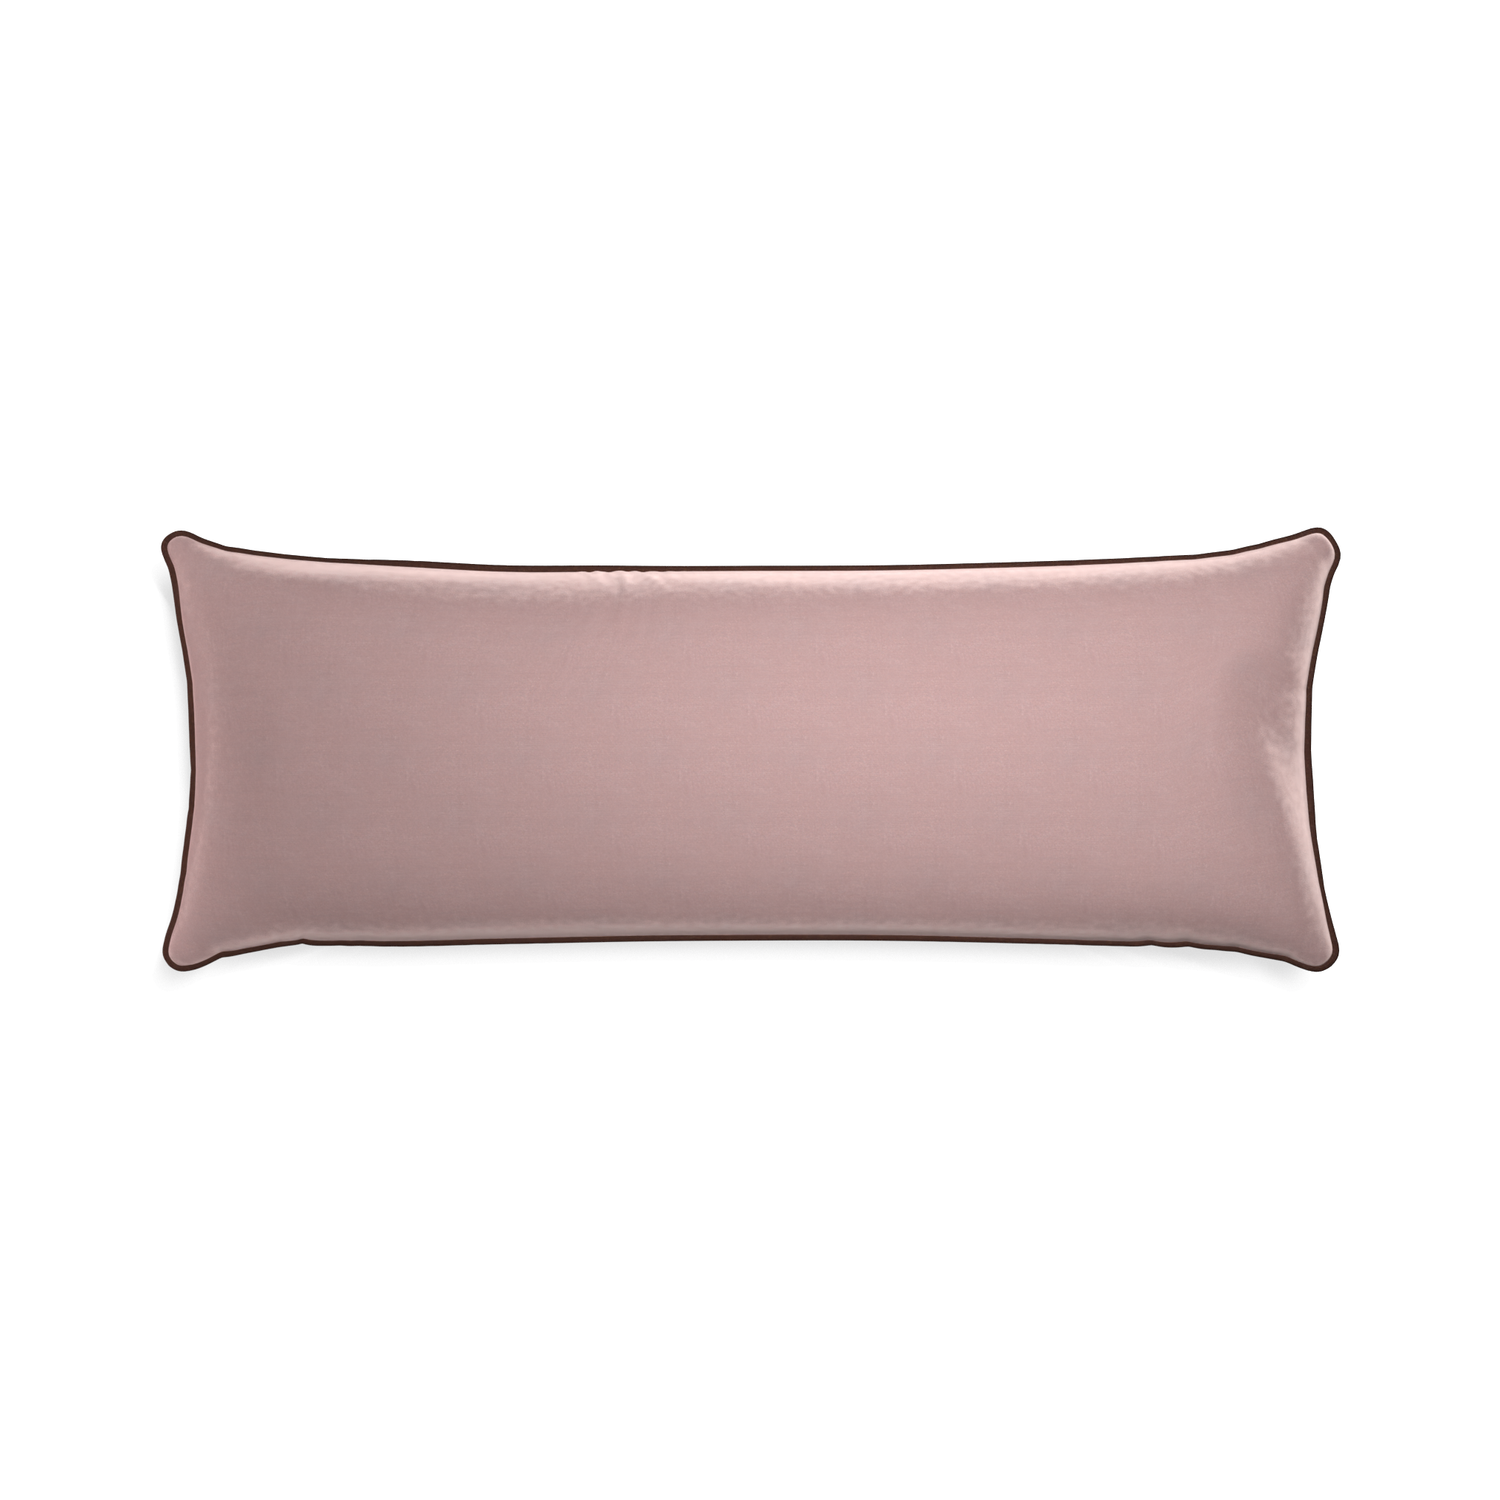 rectangle mauve velvet pillow with brown piping